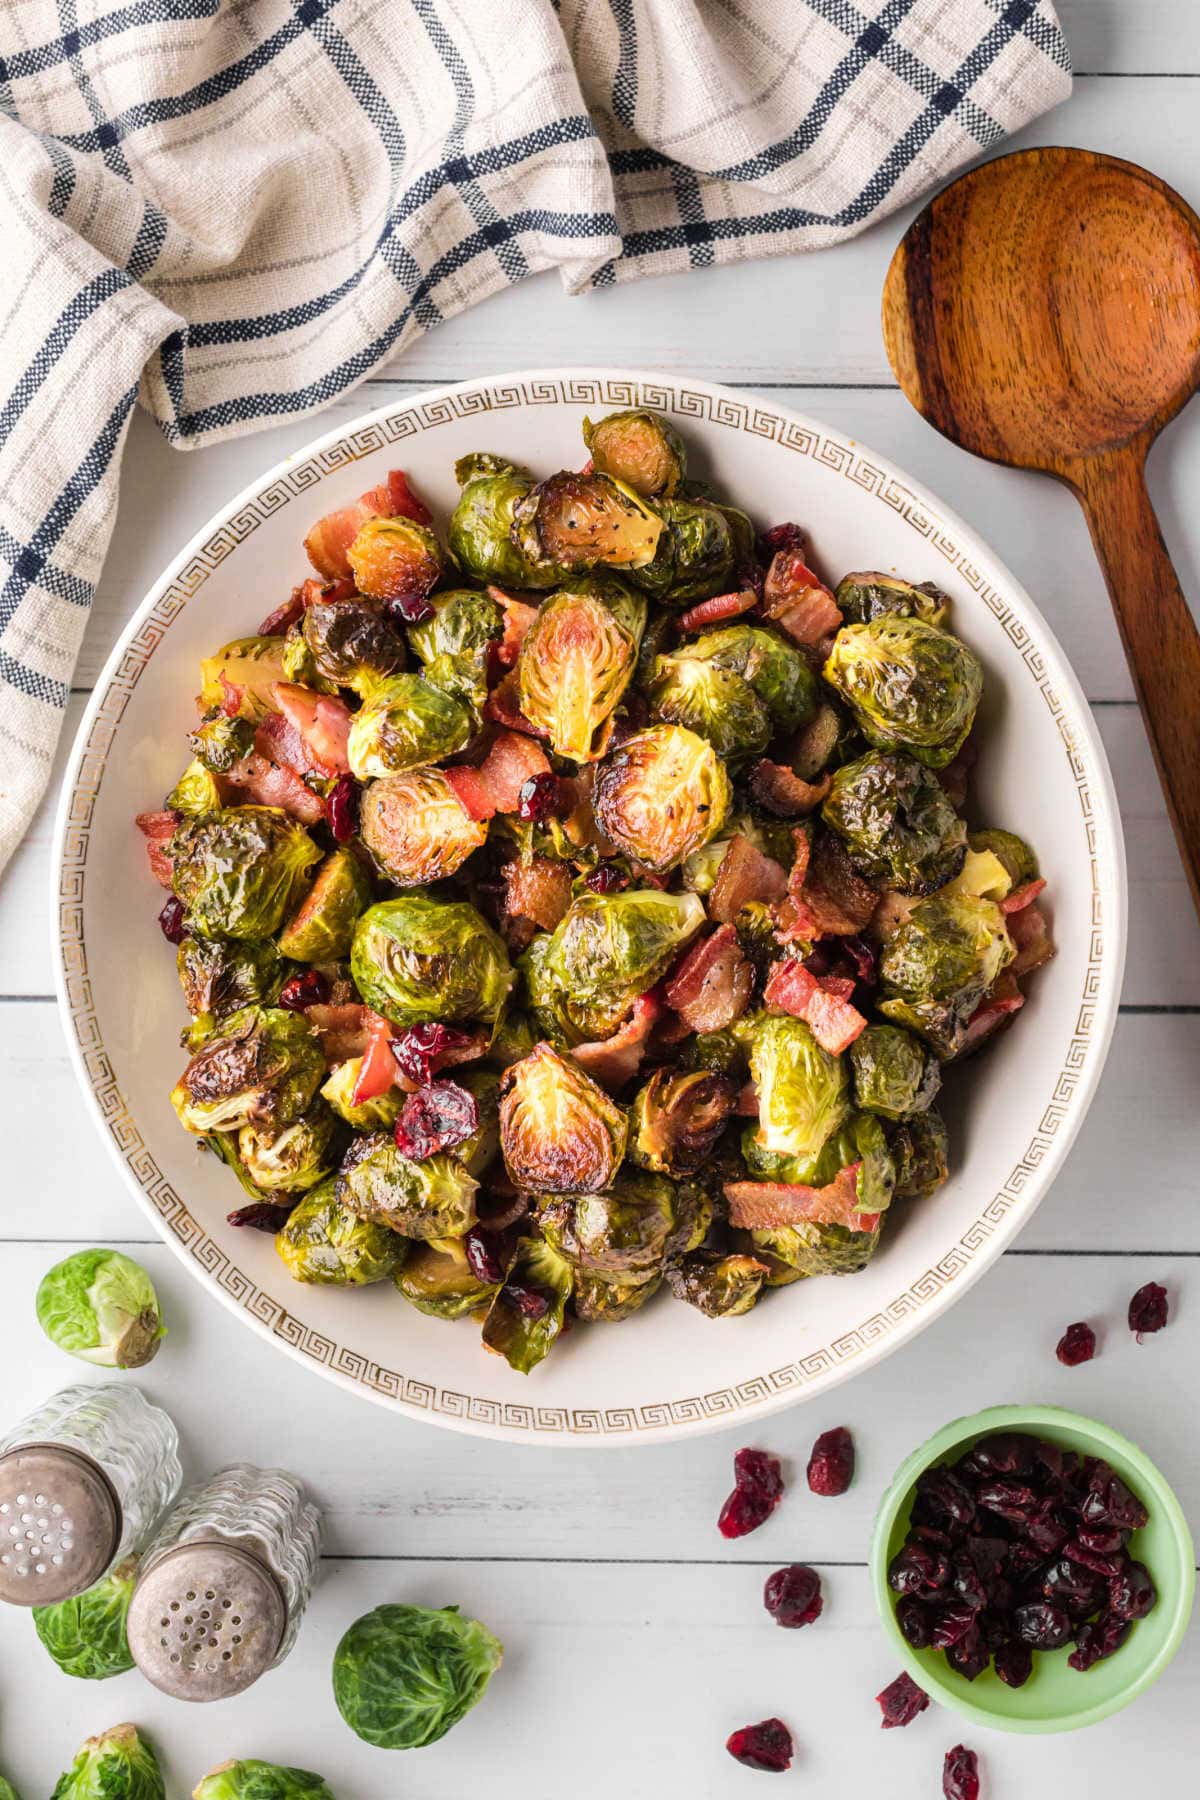 Crispy bacon and Brussels sprouts are shown in a white bowl with a big serving spoon next to it. There are cranberries tossed in with the veggies and some scattered around the outside of the bowl.